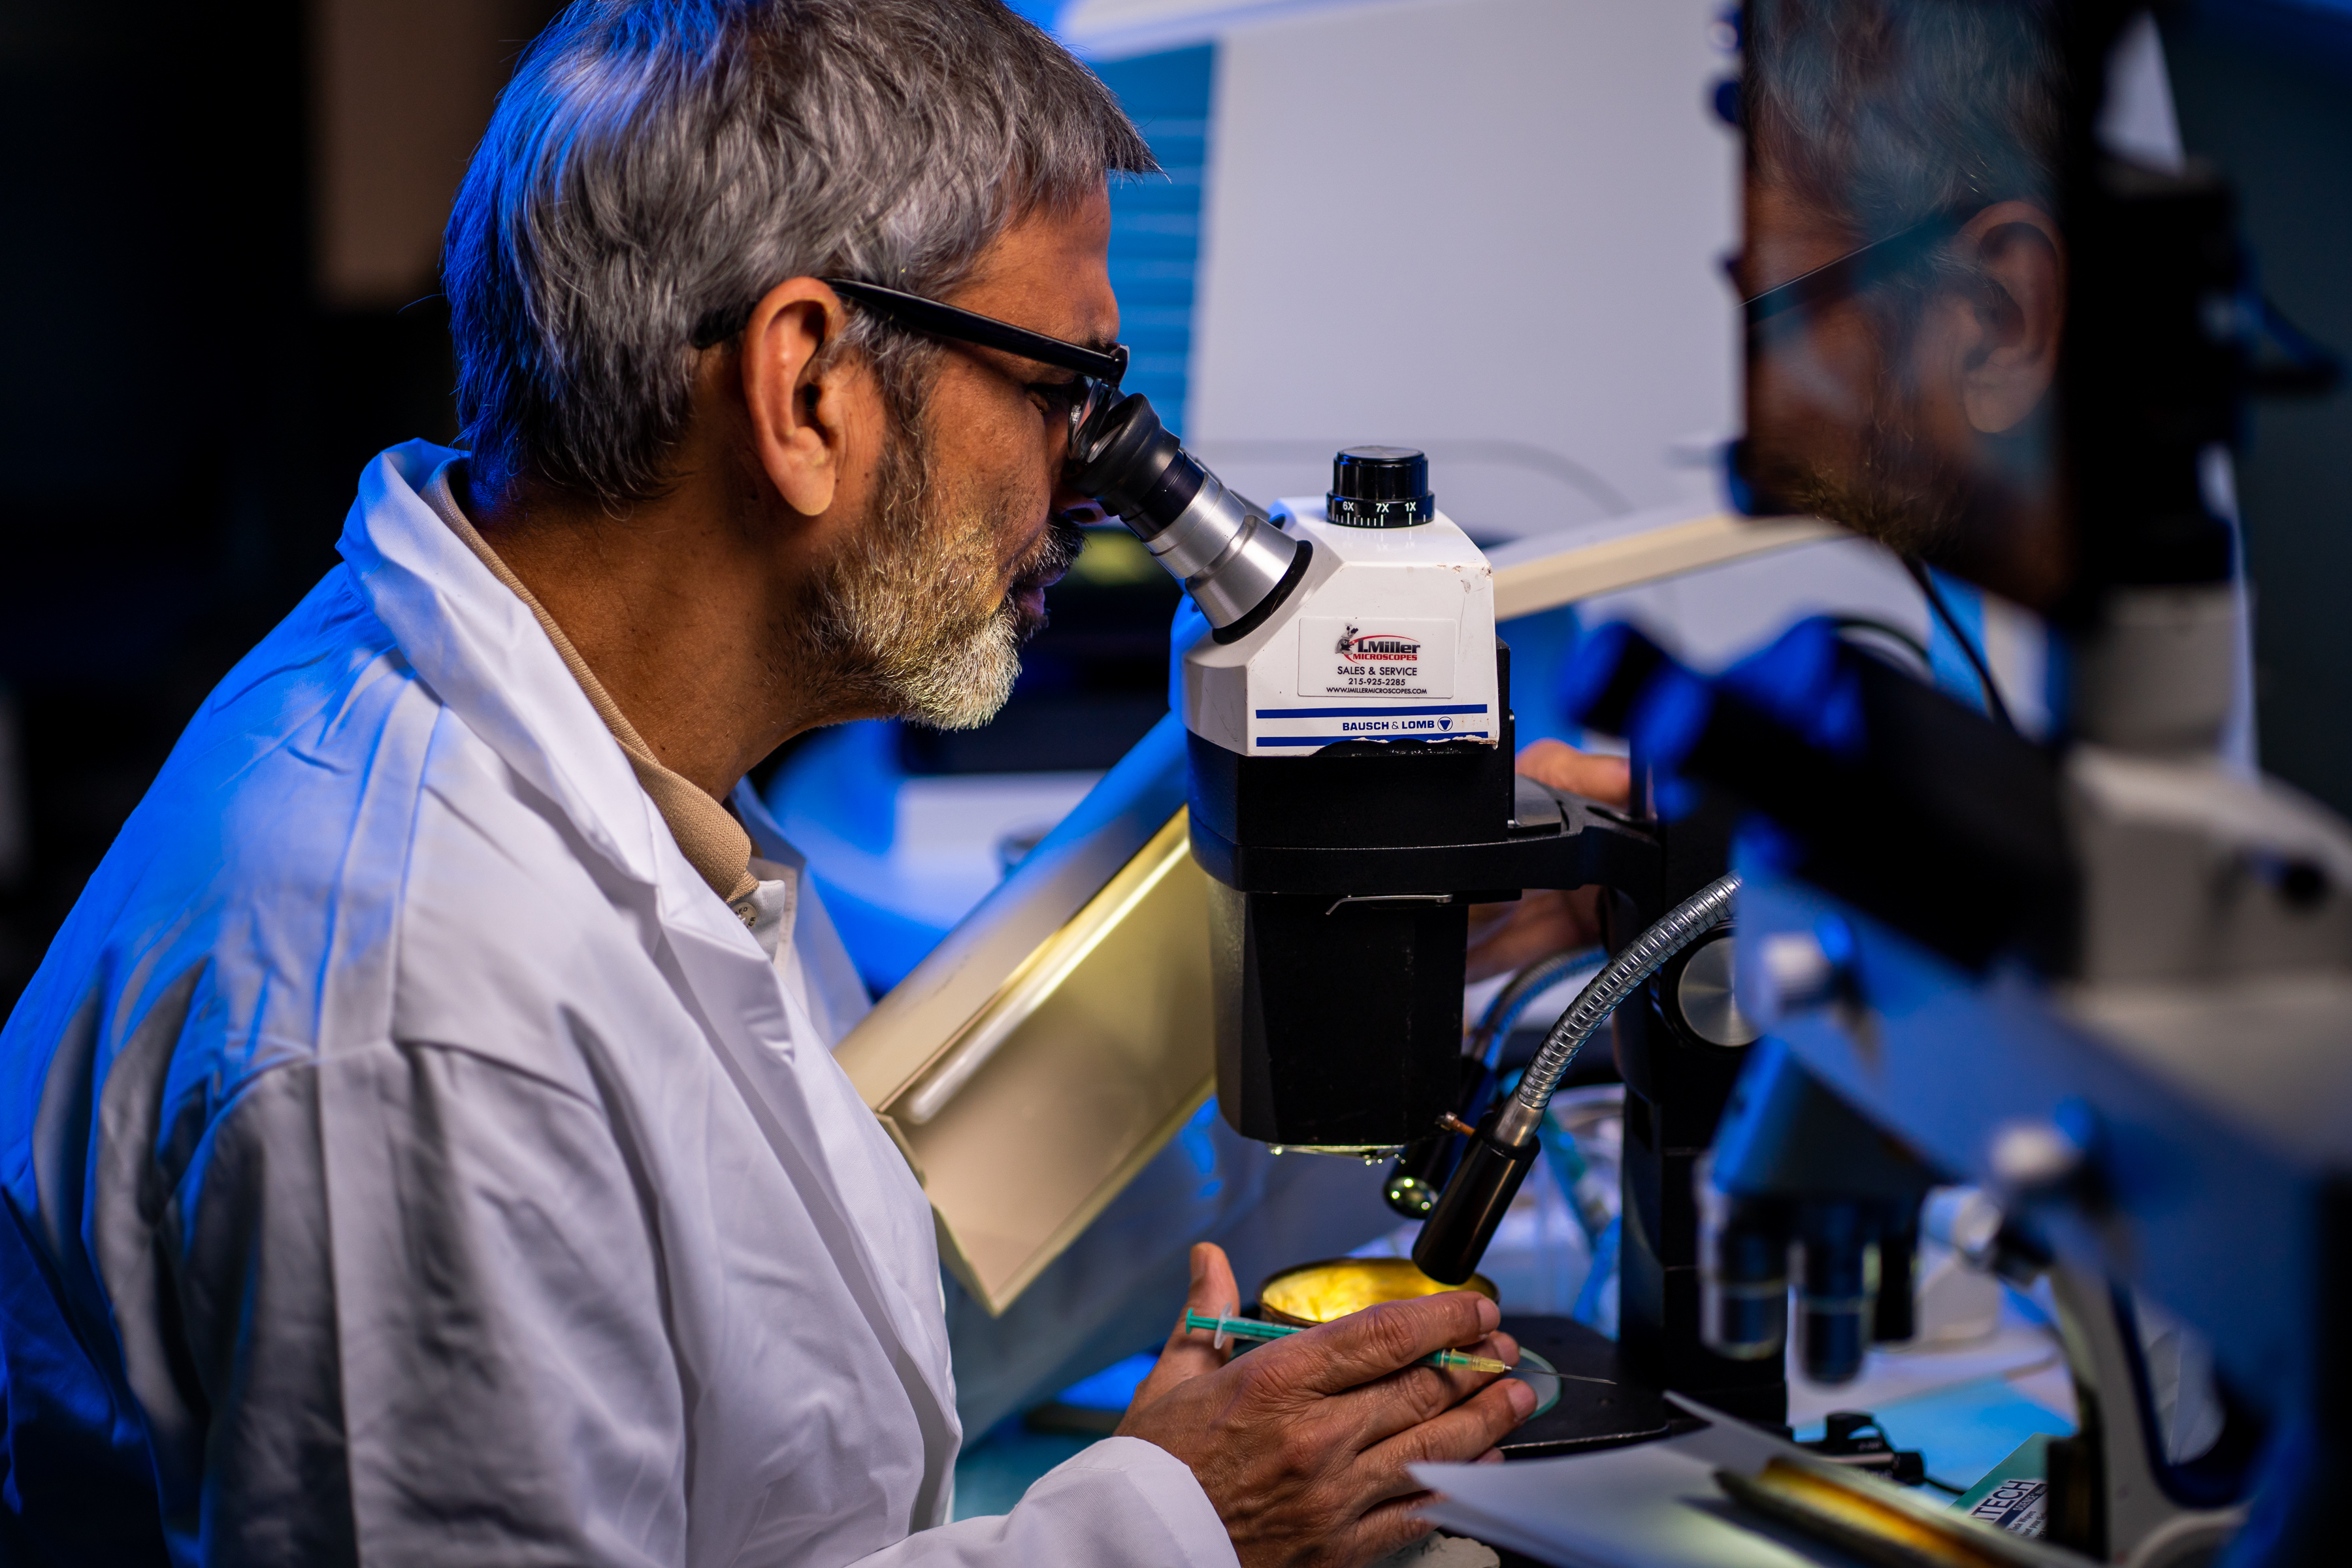 A scientist with short salt and pepper hair and close cropped beard, wearing a white lab coat and black glasses is seen in profile, peering into a microscope with pencil in hand.